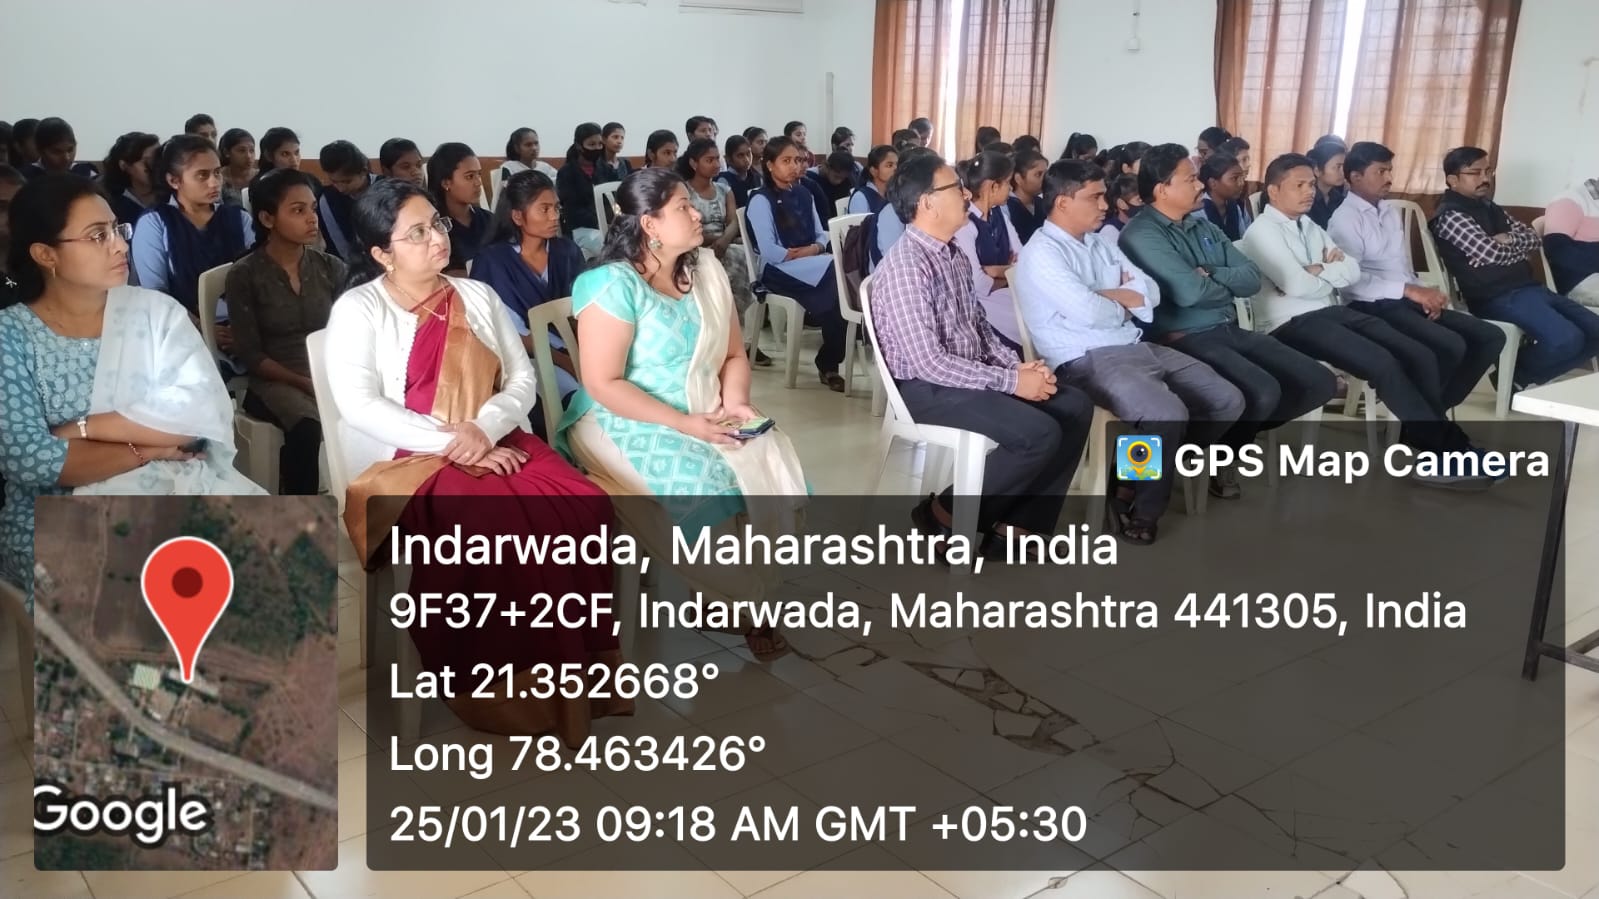 <p>On the occasion of National Voters&#39; Day on 25 th January 2023, a programme was organised by NSS cell of Arvindbabu Deshmukh Mahavidyalaya, Bharsingi. In this programme a talk was delivered by Mr. R. Ghorpade, Head Dept. of Political Science, ADM Bharsingi. He talks about importance of voting. The principal Dr. P. Pawar, all the staff and student attended this programme.</p>
